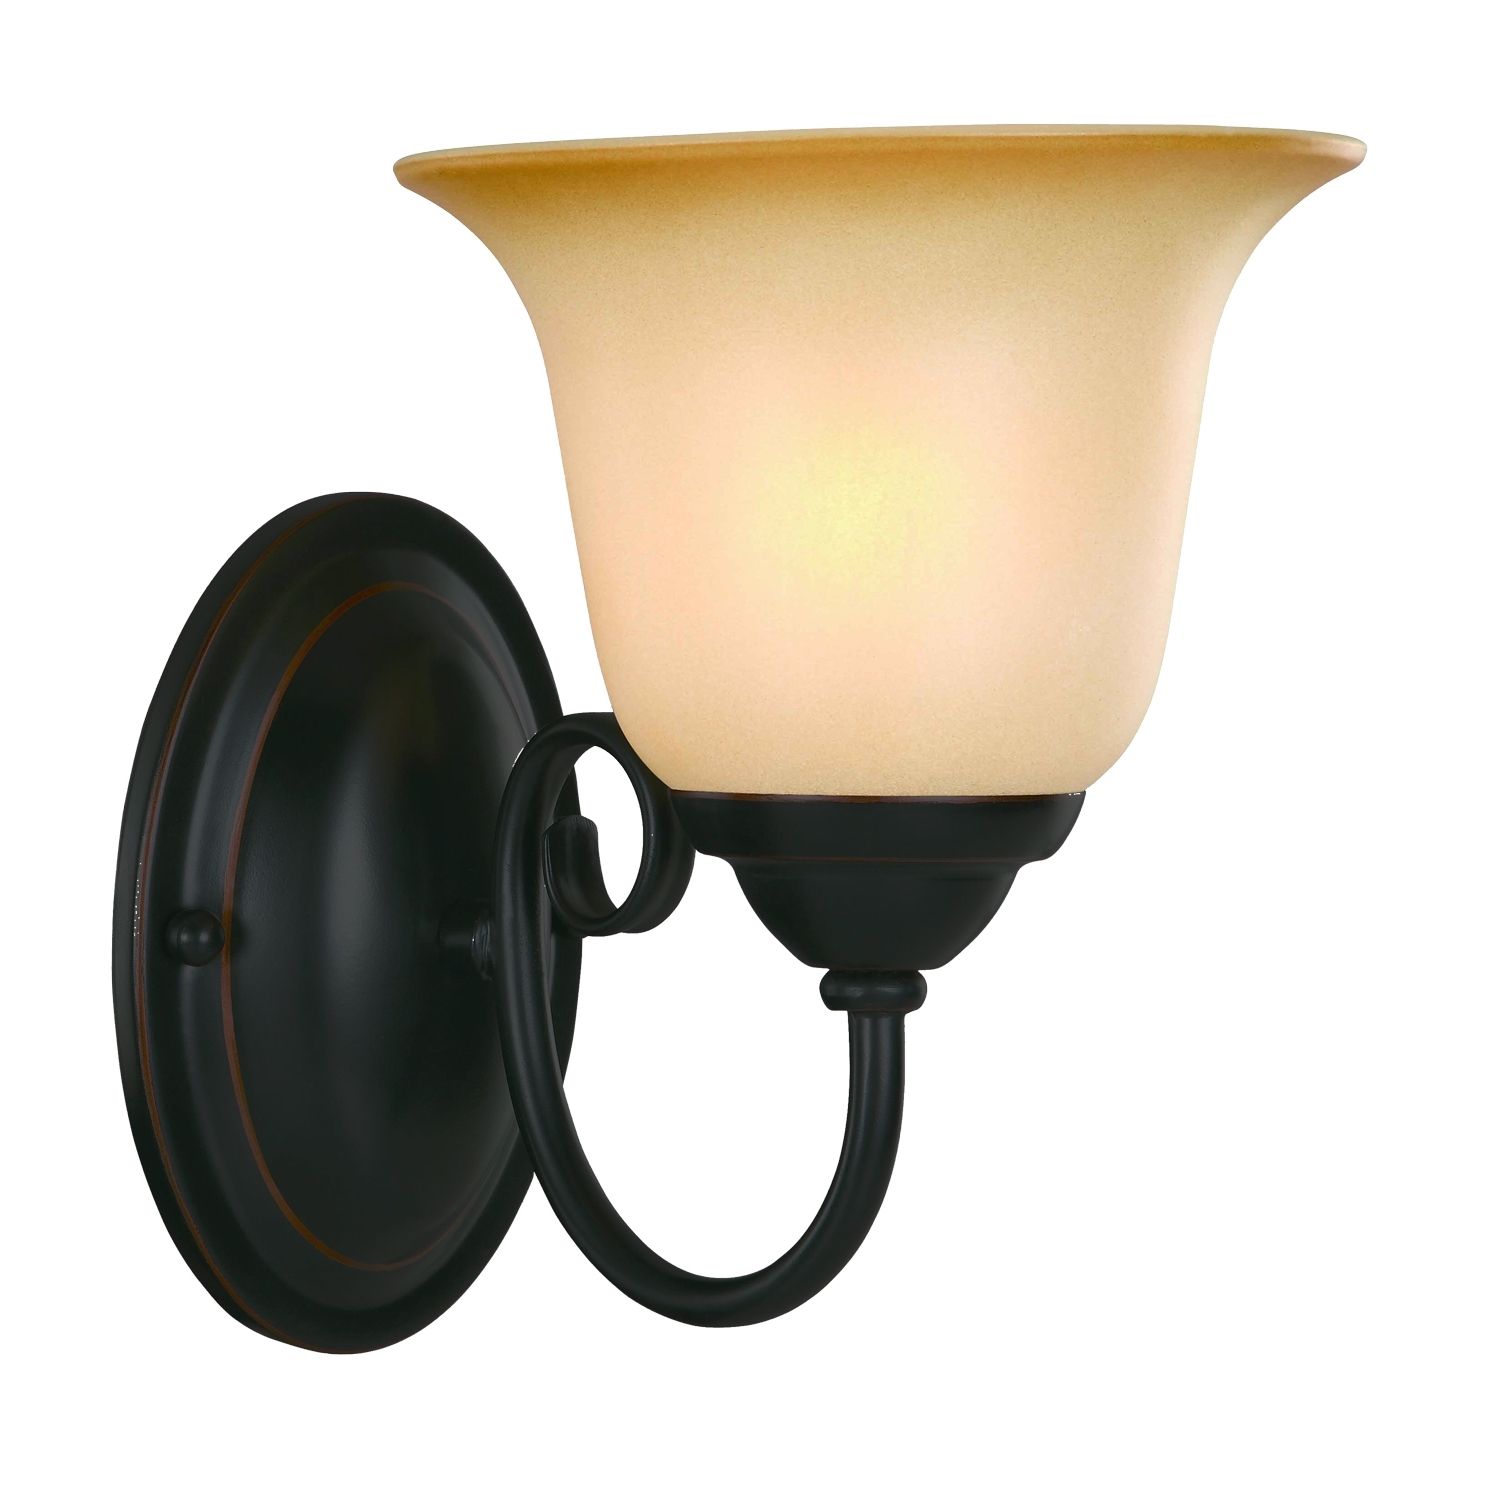 Oil Rubbed Black Bronze Bathroom Light Wall Mounted Sconce Light Inside 2019 Wall Mounted Chandeliers (View 1 of 20)